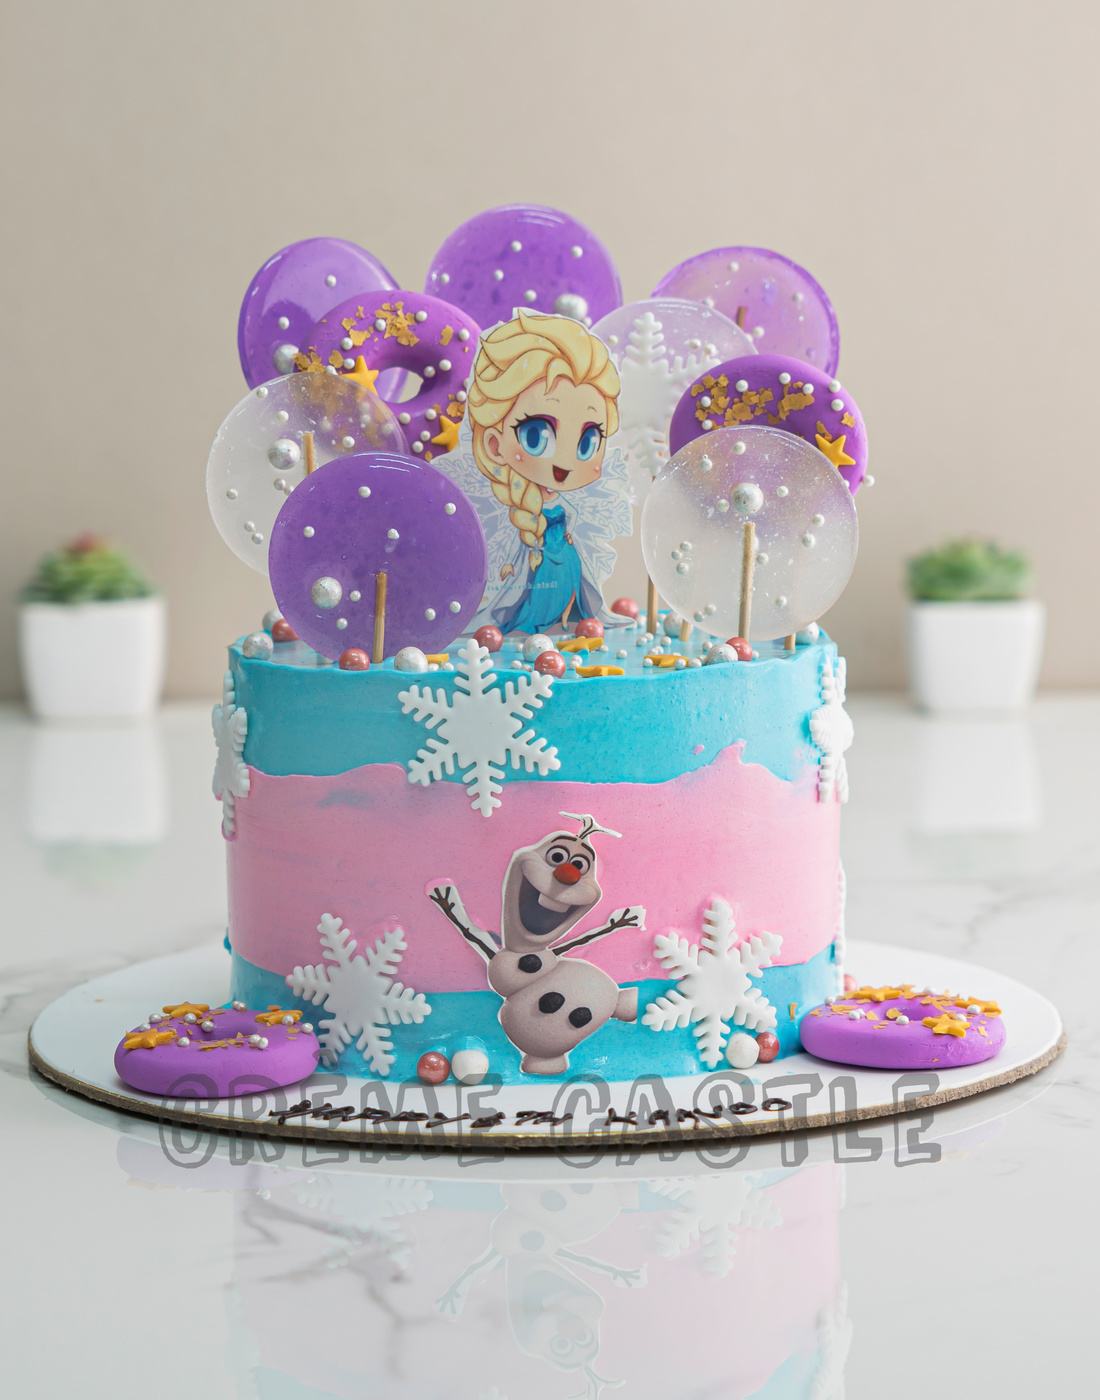 Astonishing Assortment of Frozen Cake Images in Full 4K Resolution – Over 999 Pictures